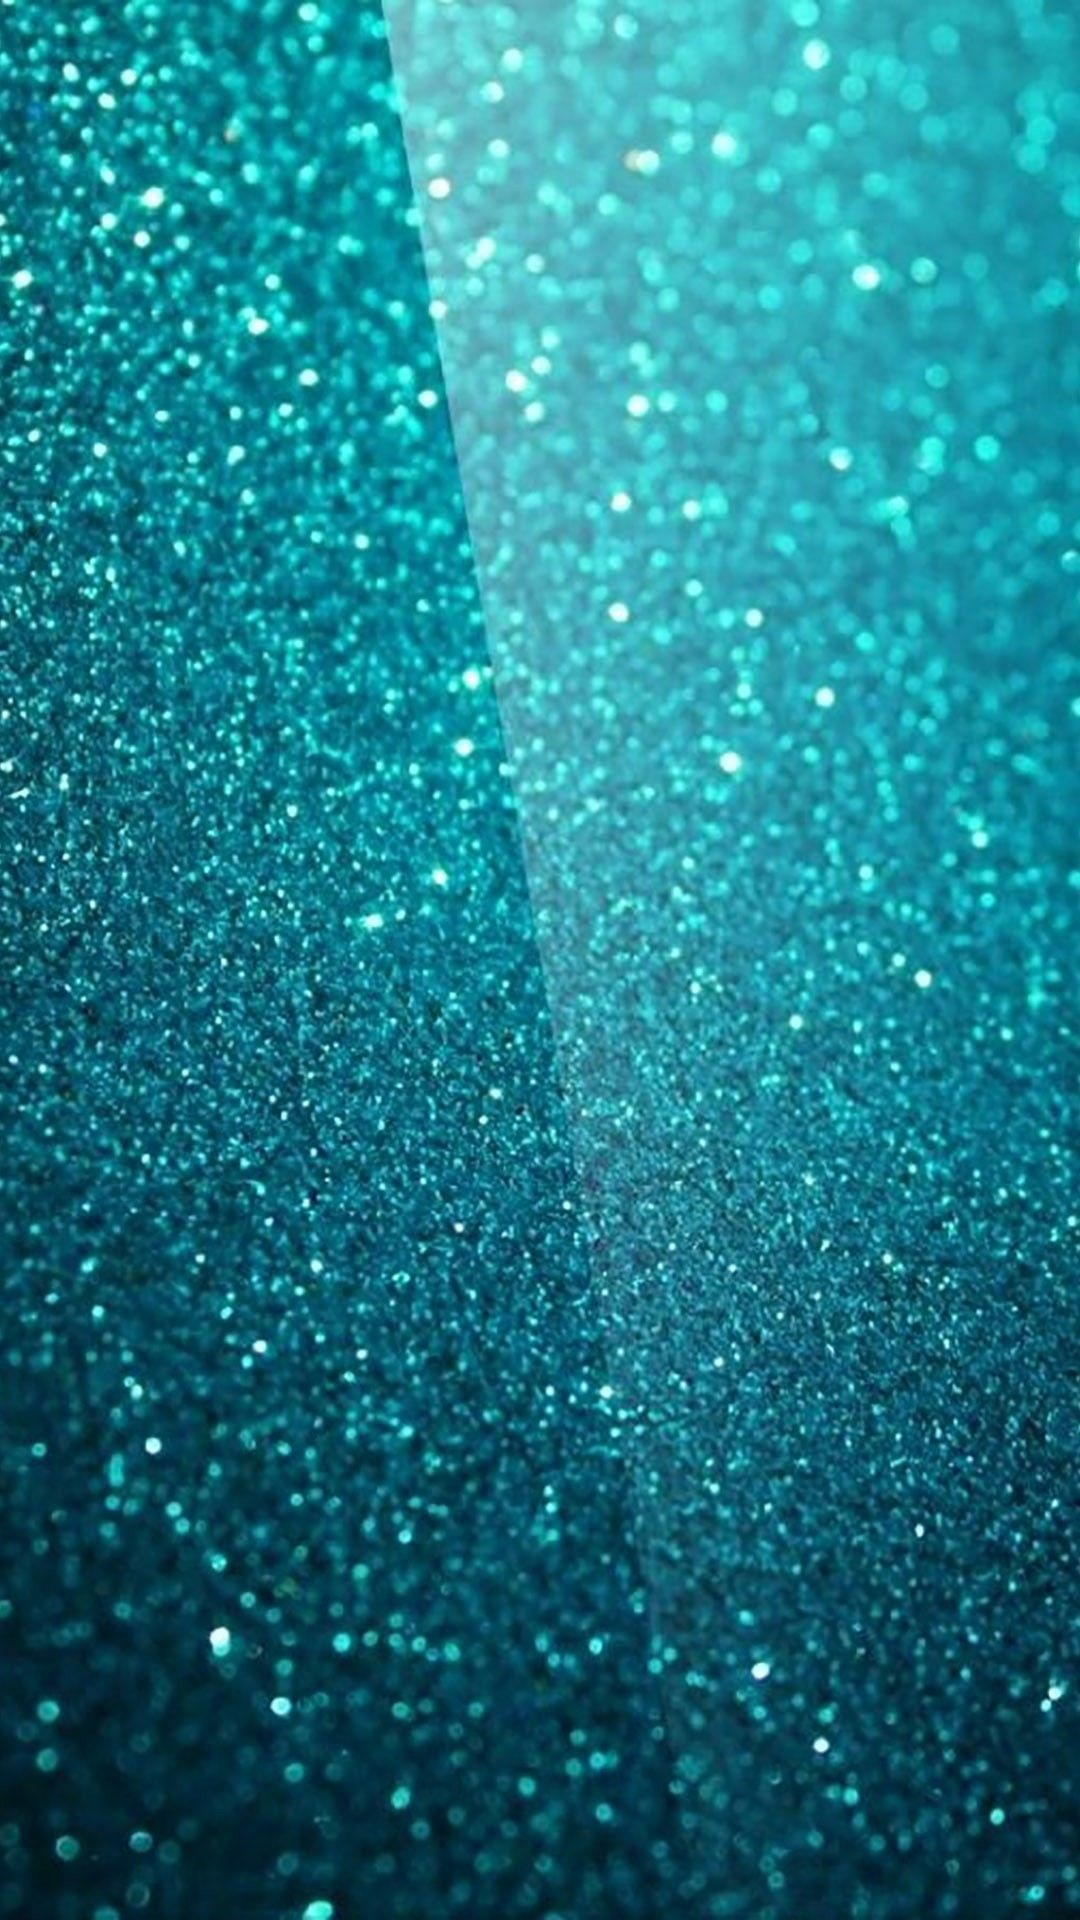 Sparkle iPhone hd wallpaper